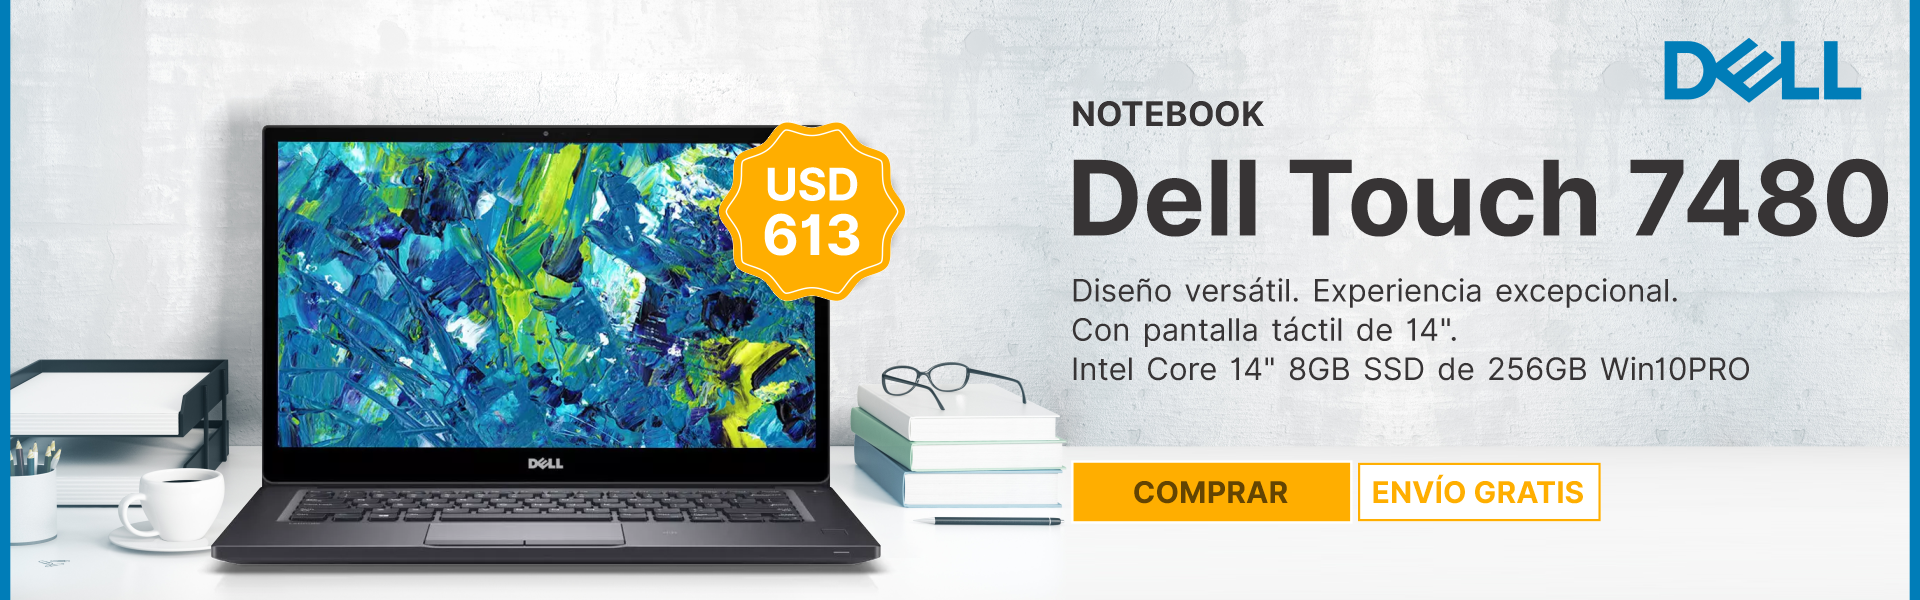 Notebook Dell Touch 7480